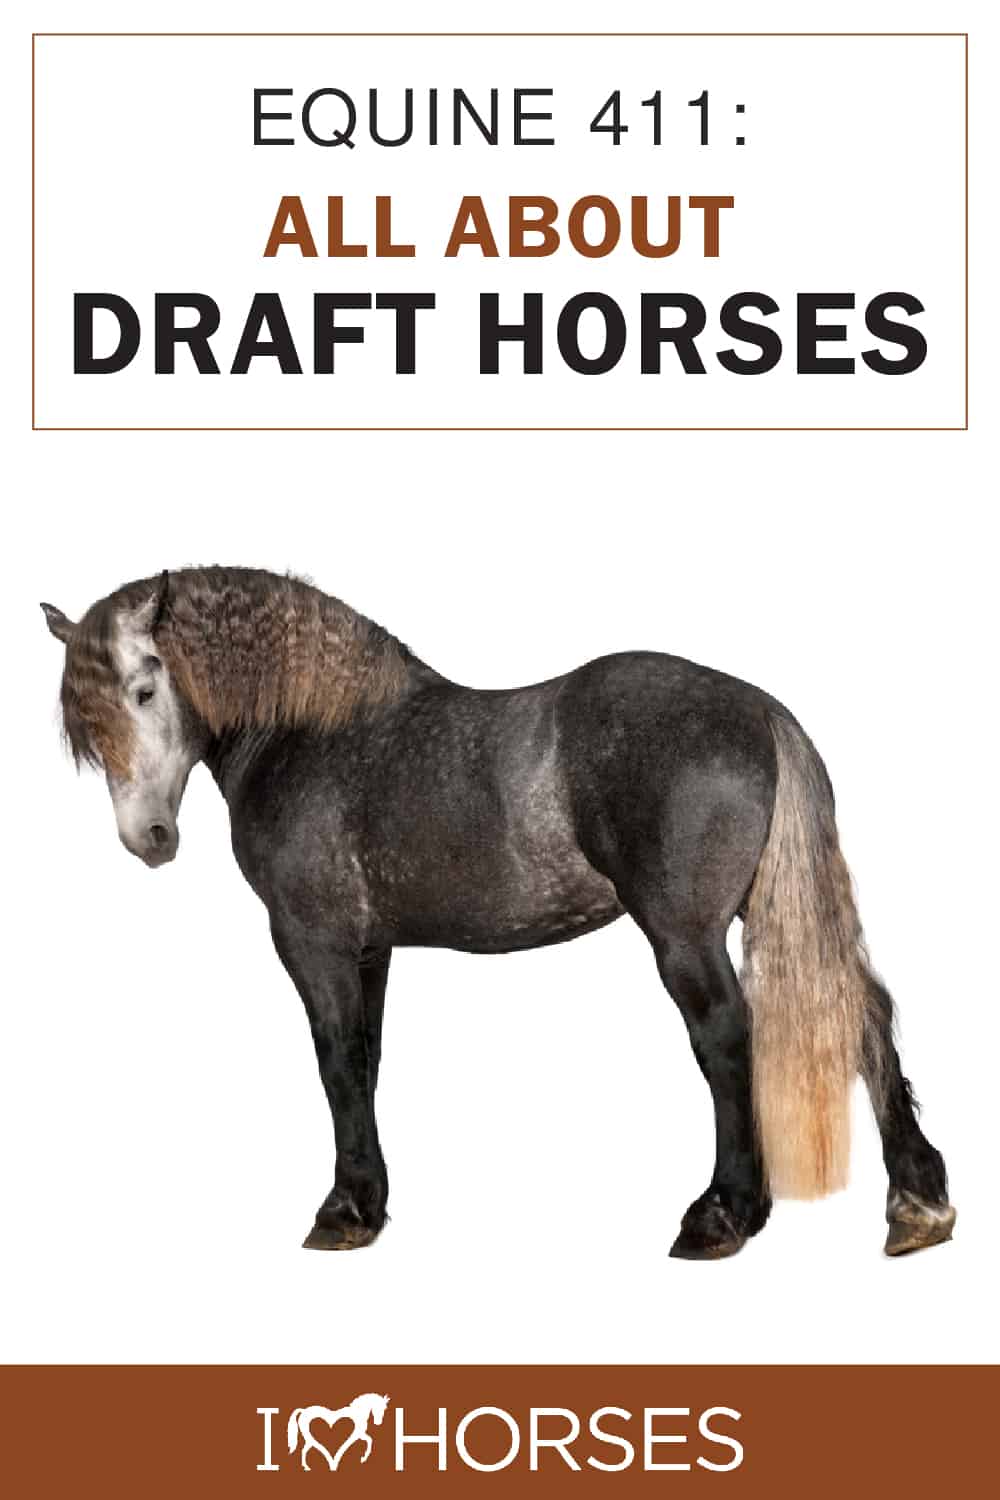 All About Draft Horses